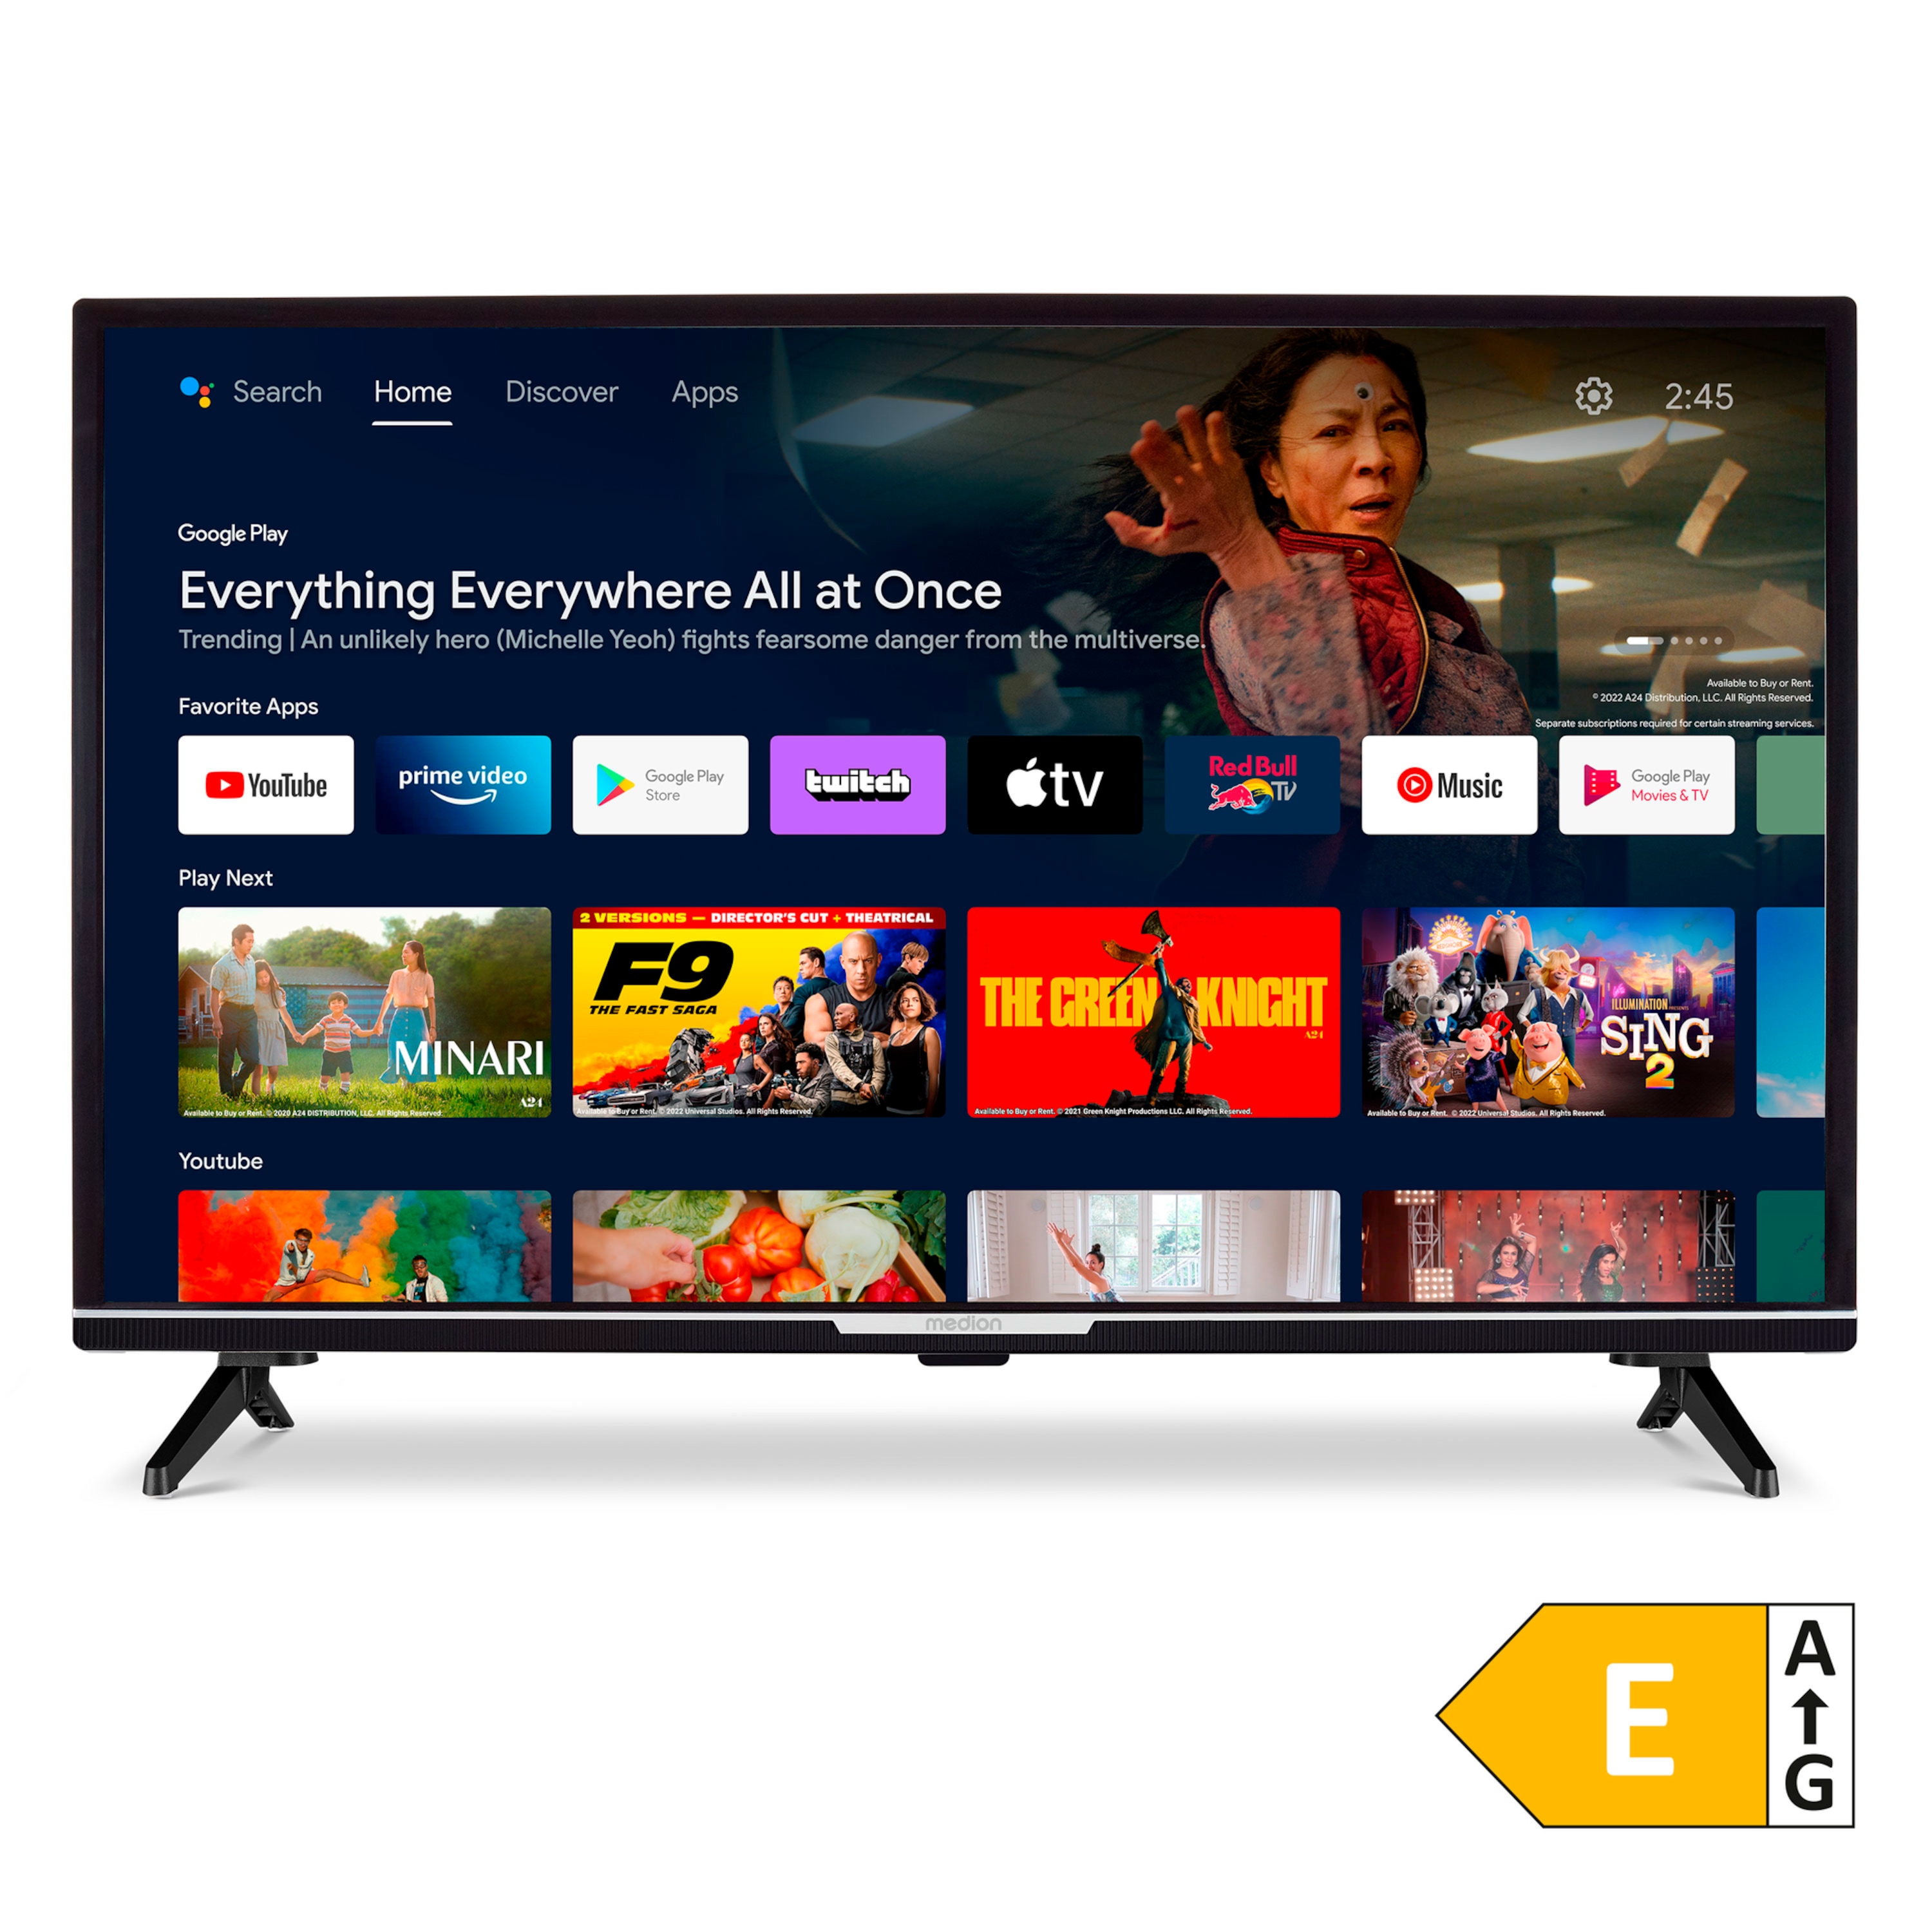 Life and  günstig Kaufen-MEDION LIFE® P13242 (MD 30042) Android TV, 80 cm (32''), Full HD Display, HDR, PVR ready, Bluetooth®, Netflix, Amazon Prime Video. MEDION LIFE® P13242 (MD 30042) Android TV, 80 cm (32''), Full HD Display, HDR, PVR ready, Bluetooth®, Ne